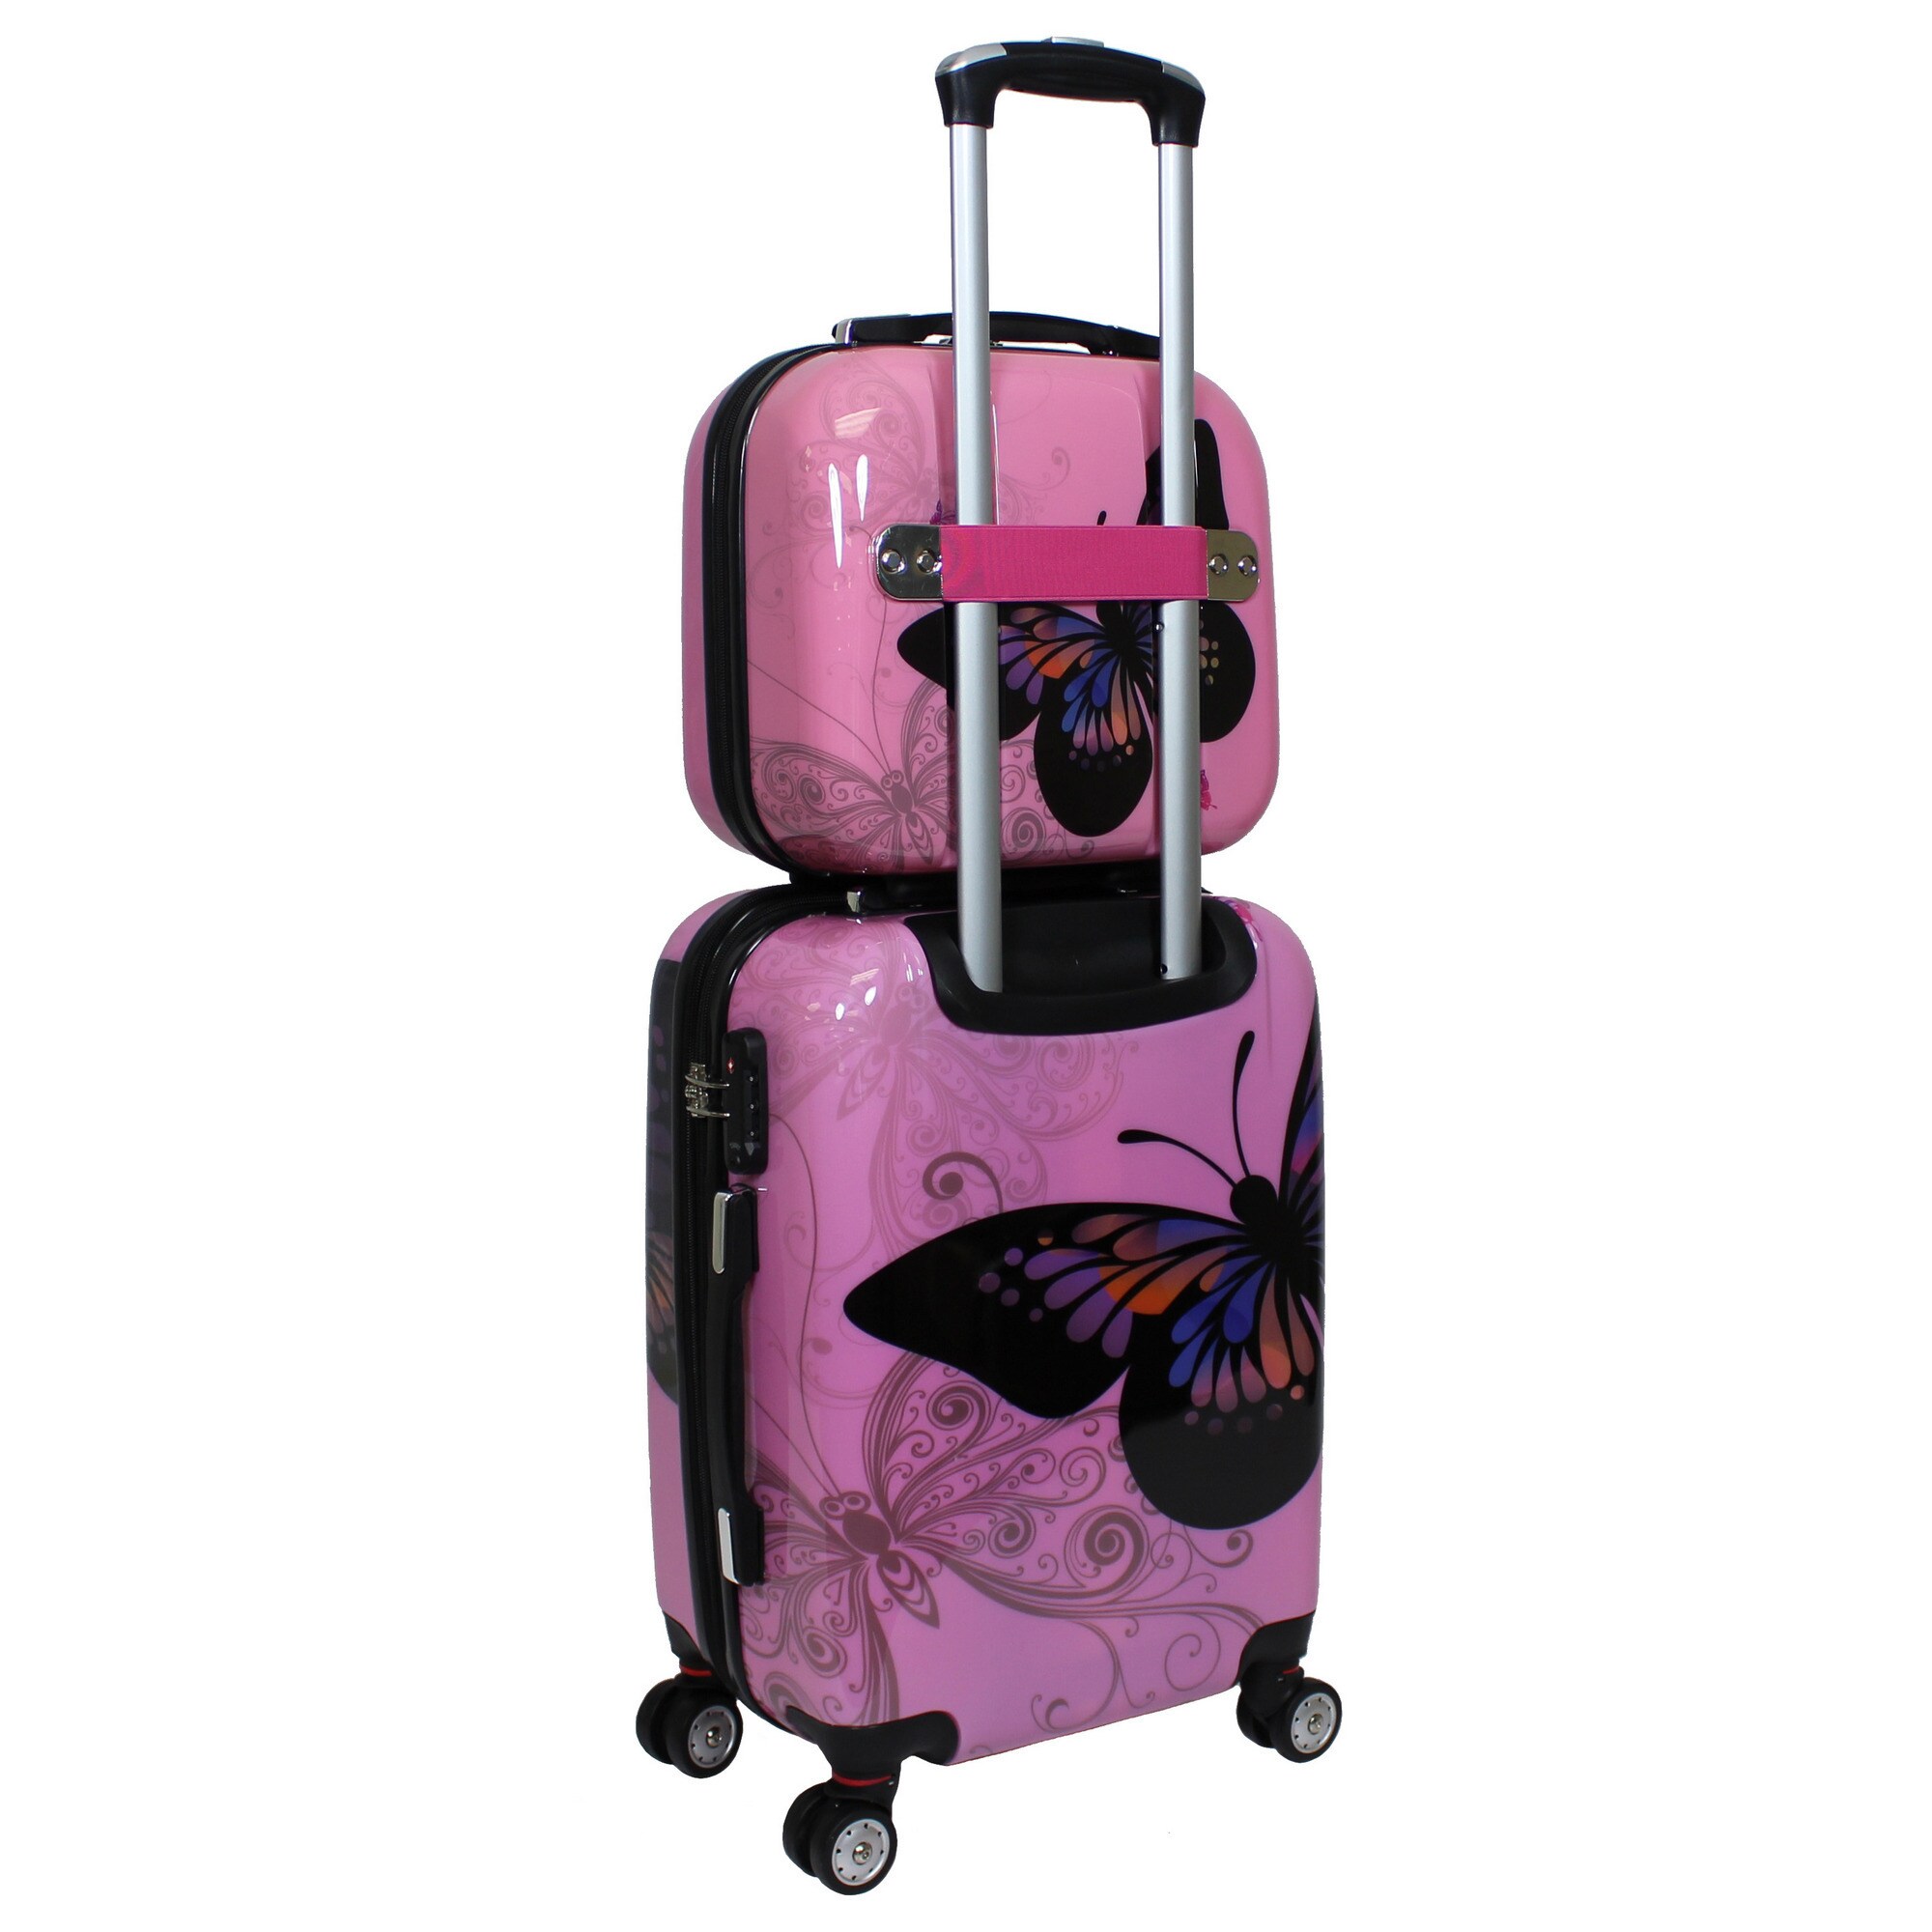 World Traveler Butterfly 2-piece Hardside Carry-on Spinner Luggage Set in  White (As Is Item) - Bed Bath & Beyond - 10783825